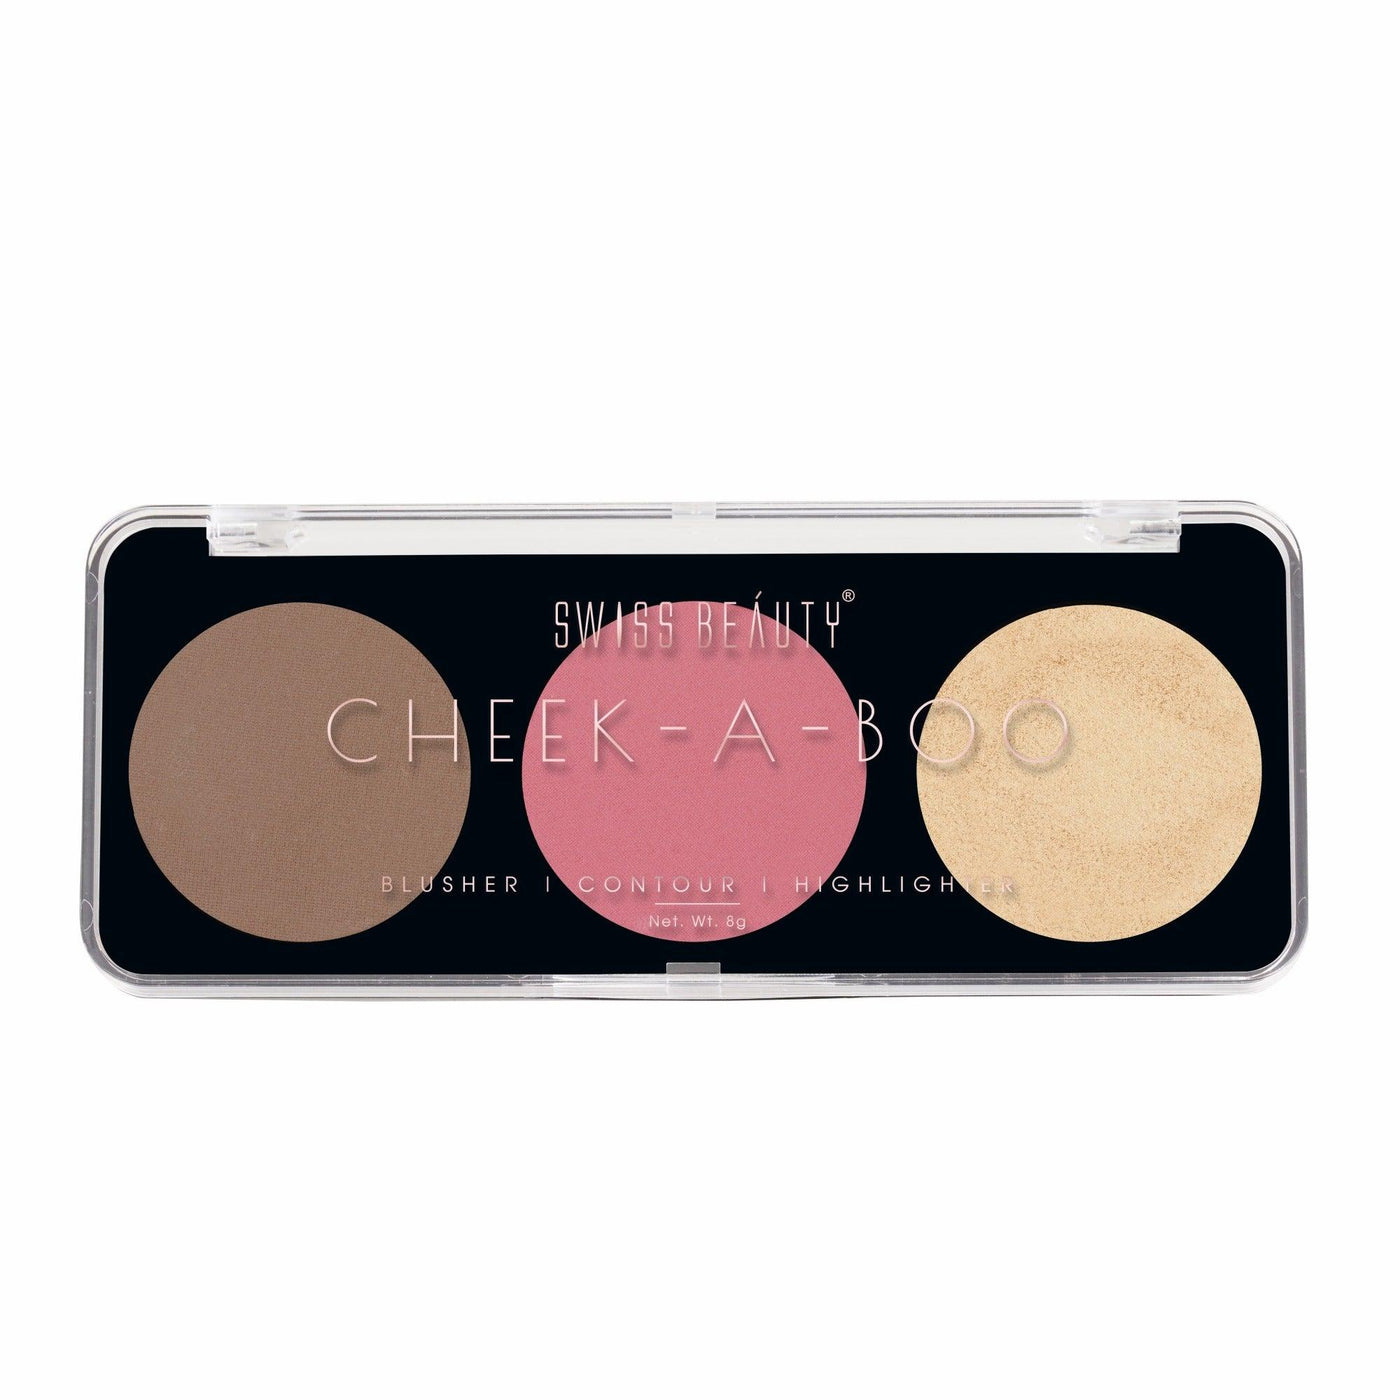 Cheek-A-Boo 3-in-1 Face Palette with Blusher , Contour and Highlighter